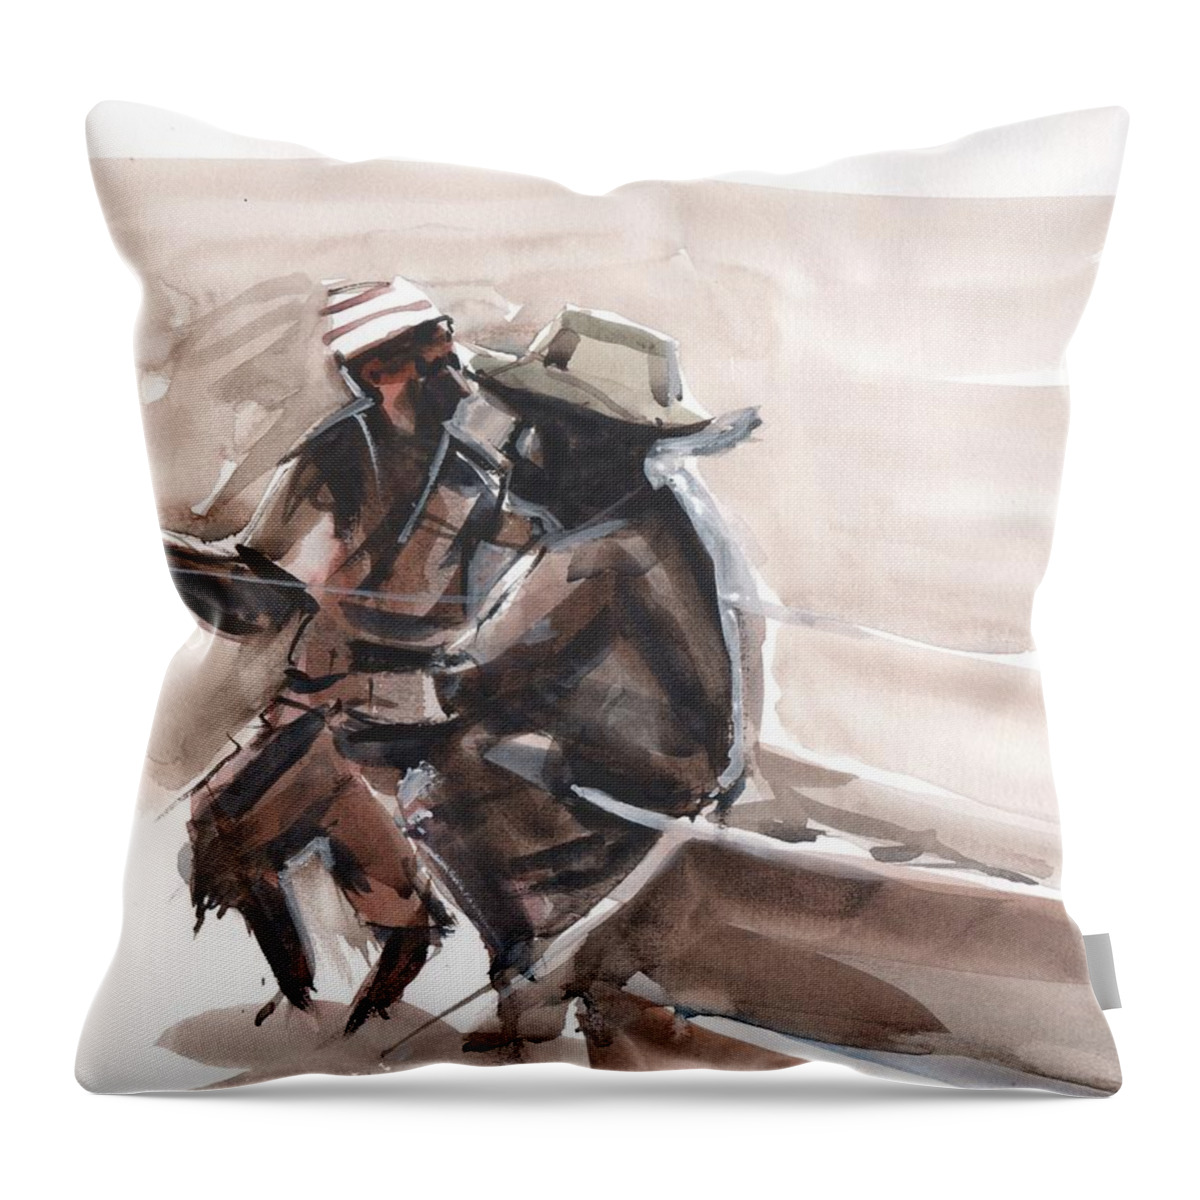  Throw Pillow featuring the painting Fishermen Prelim Sepia Sketch by Gaston McKenzie